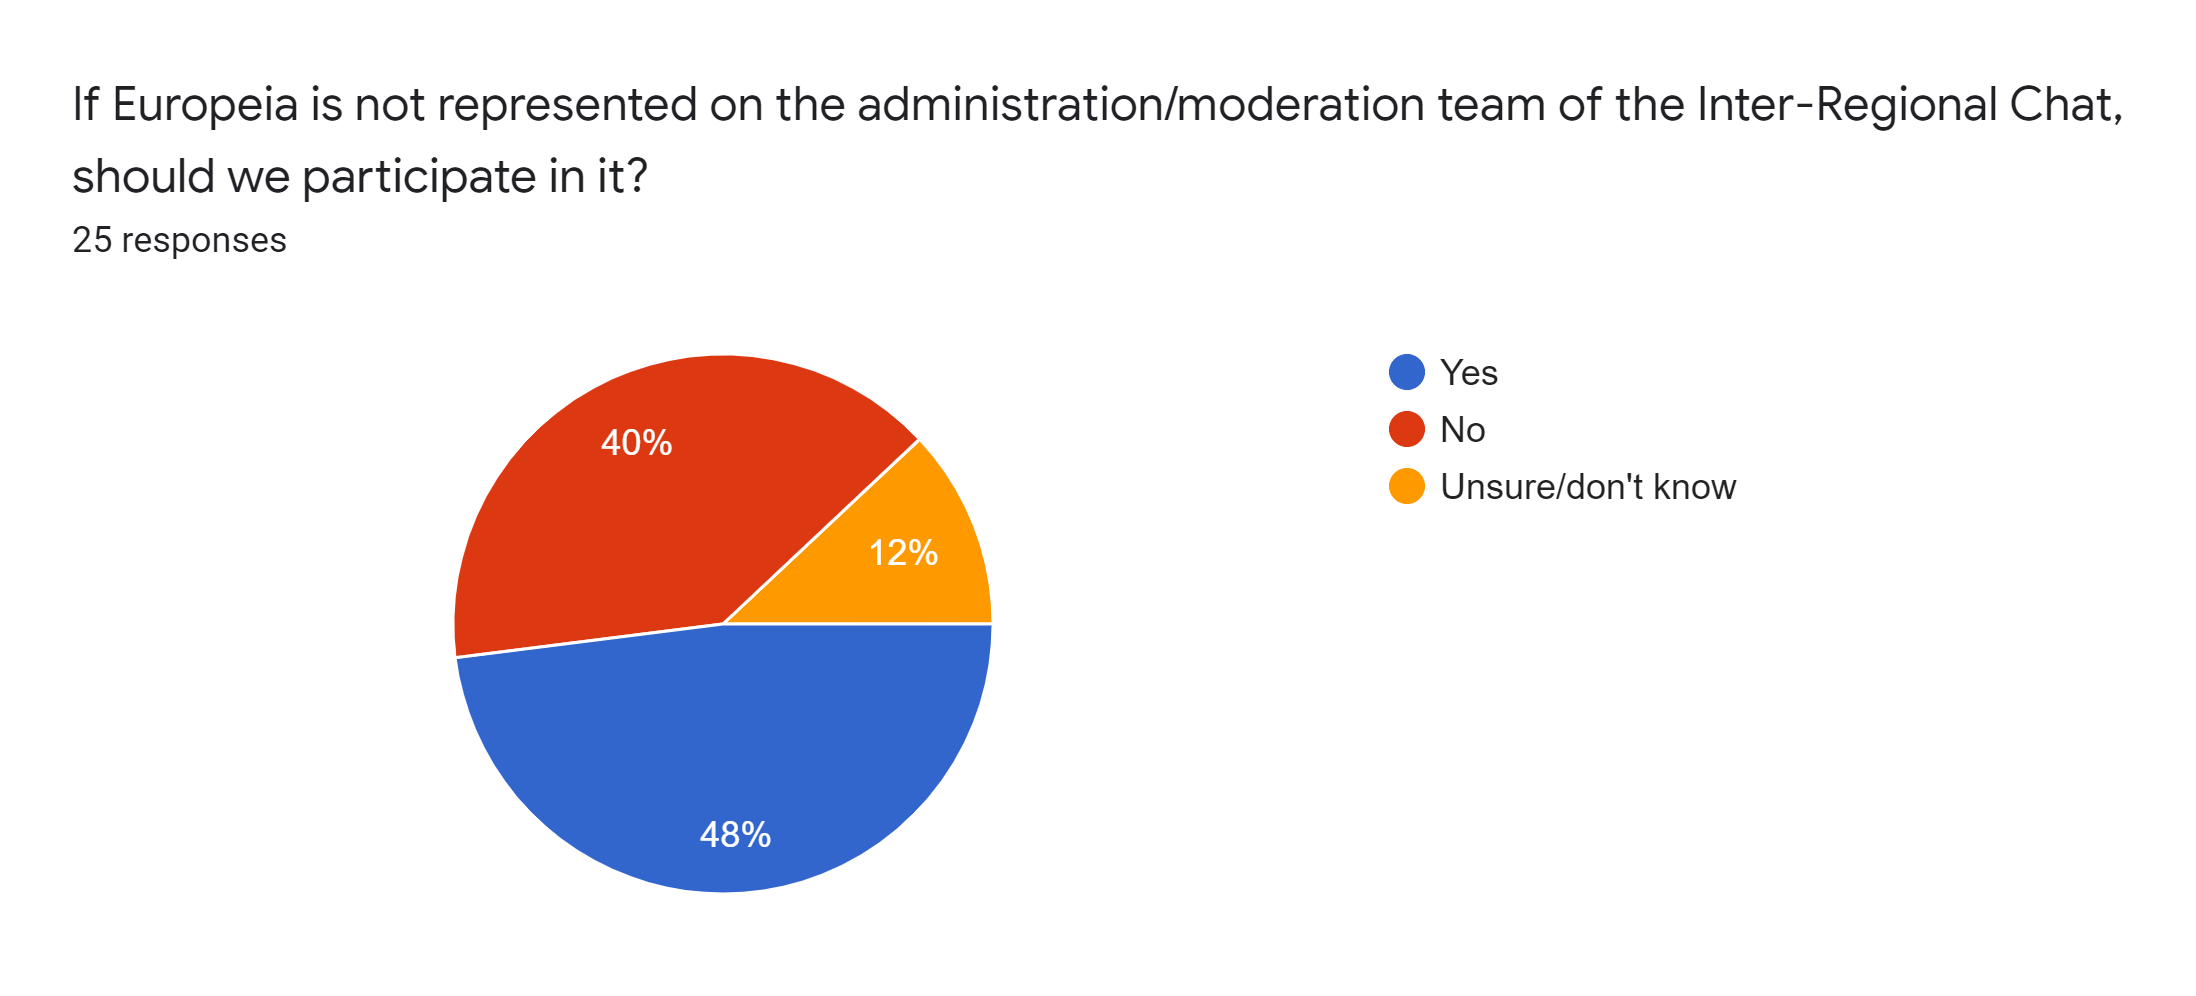 Forms response chart. Question title: If Europeia is not represented on the administration/moderation team of the Inter-Regional Chat, should we participate in it?. Number of responses: 25 responses.